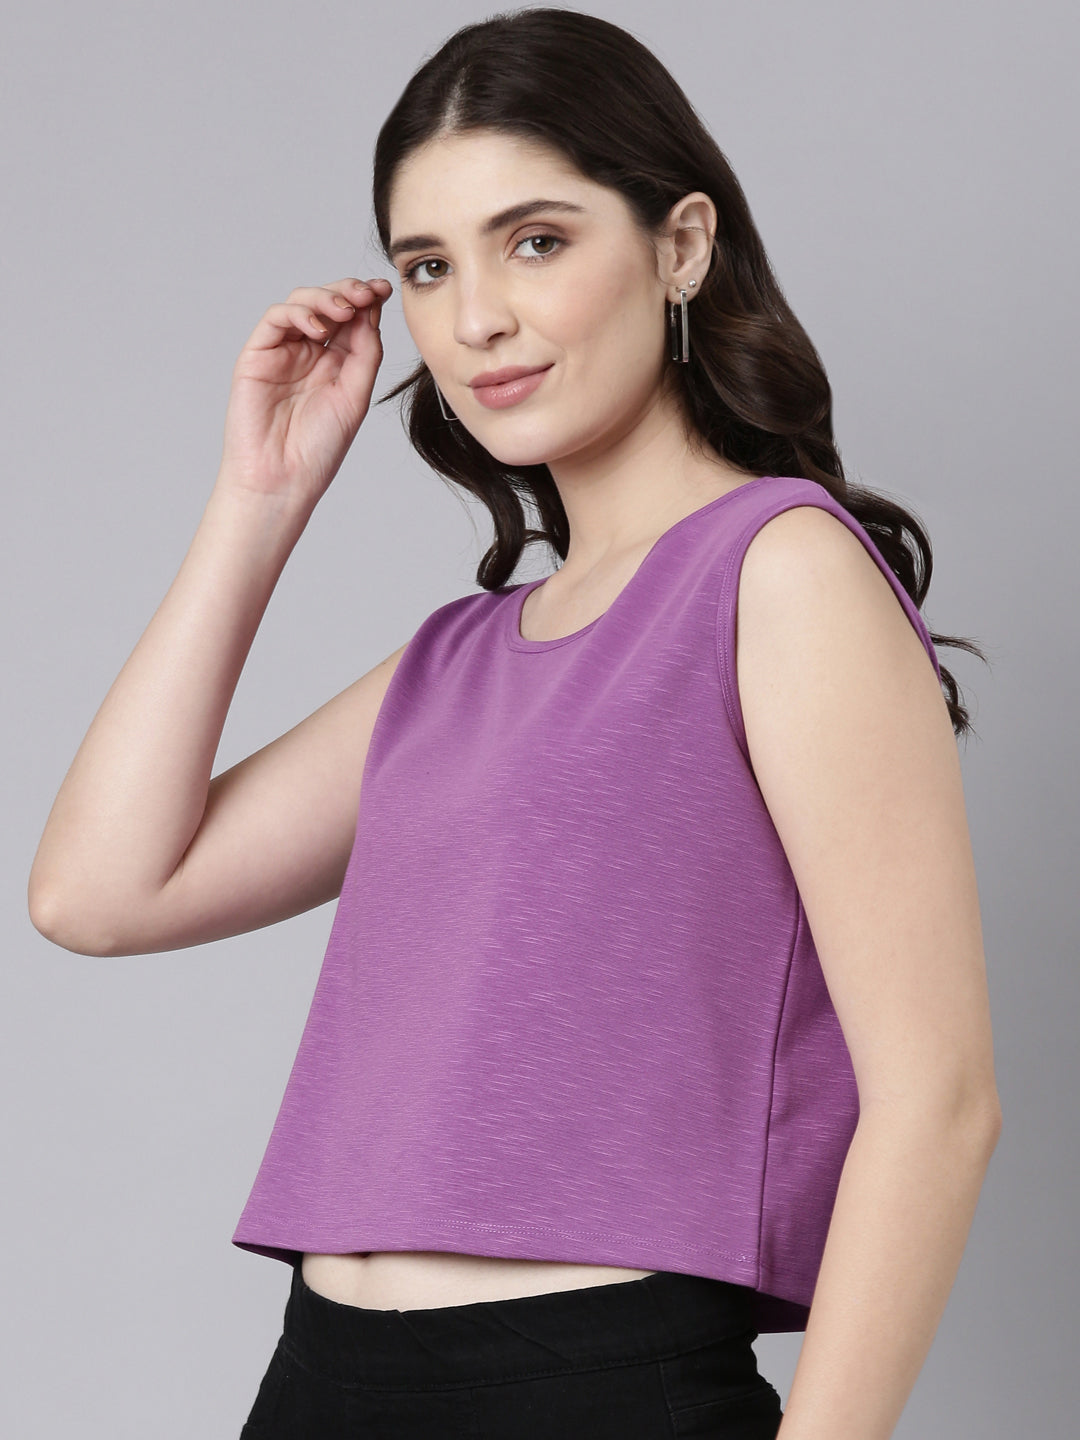 TheShaili Ribbed Cotton Crop Top for Womens/Summer Tops for Women & Girls/Casual Solid Ribbed Top - Fancy Tops for Women Lavender